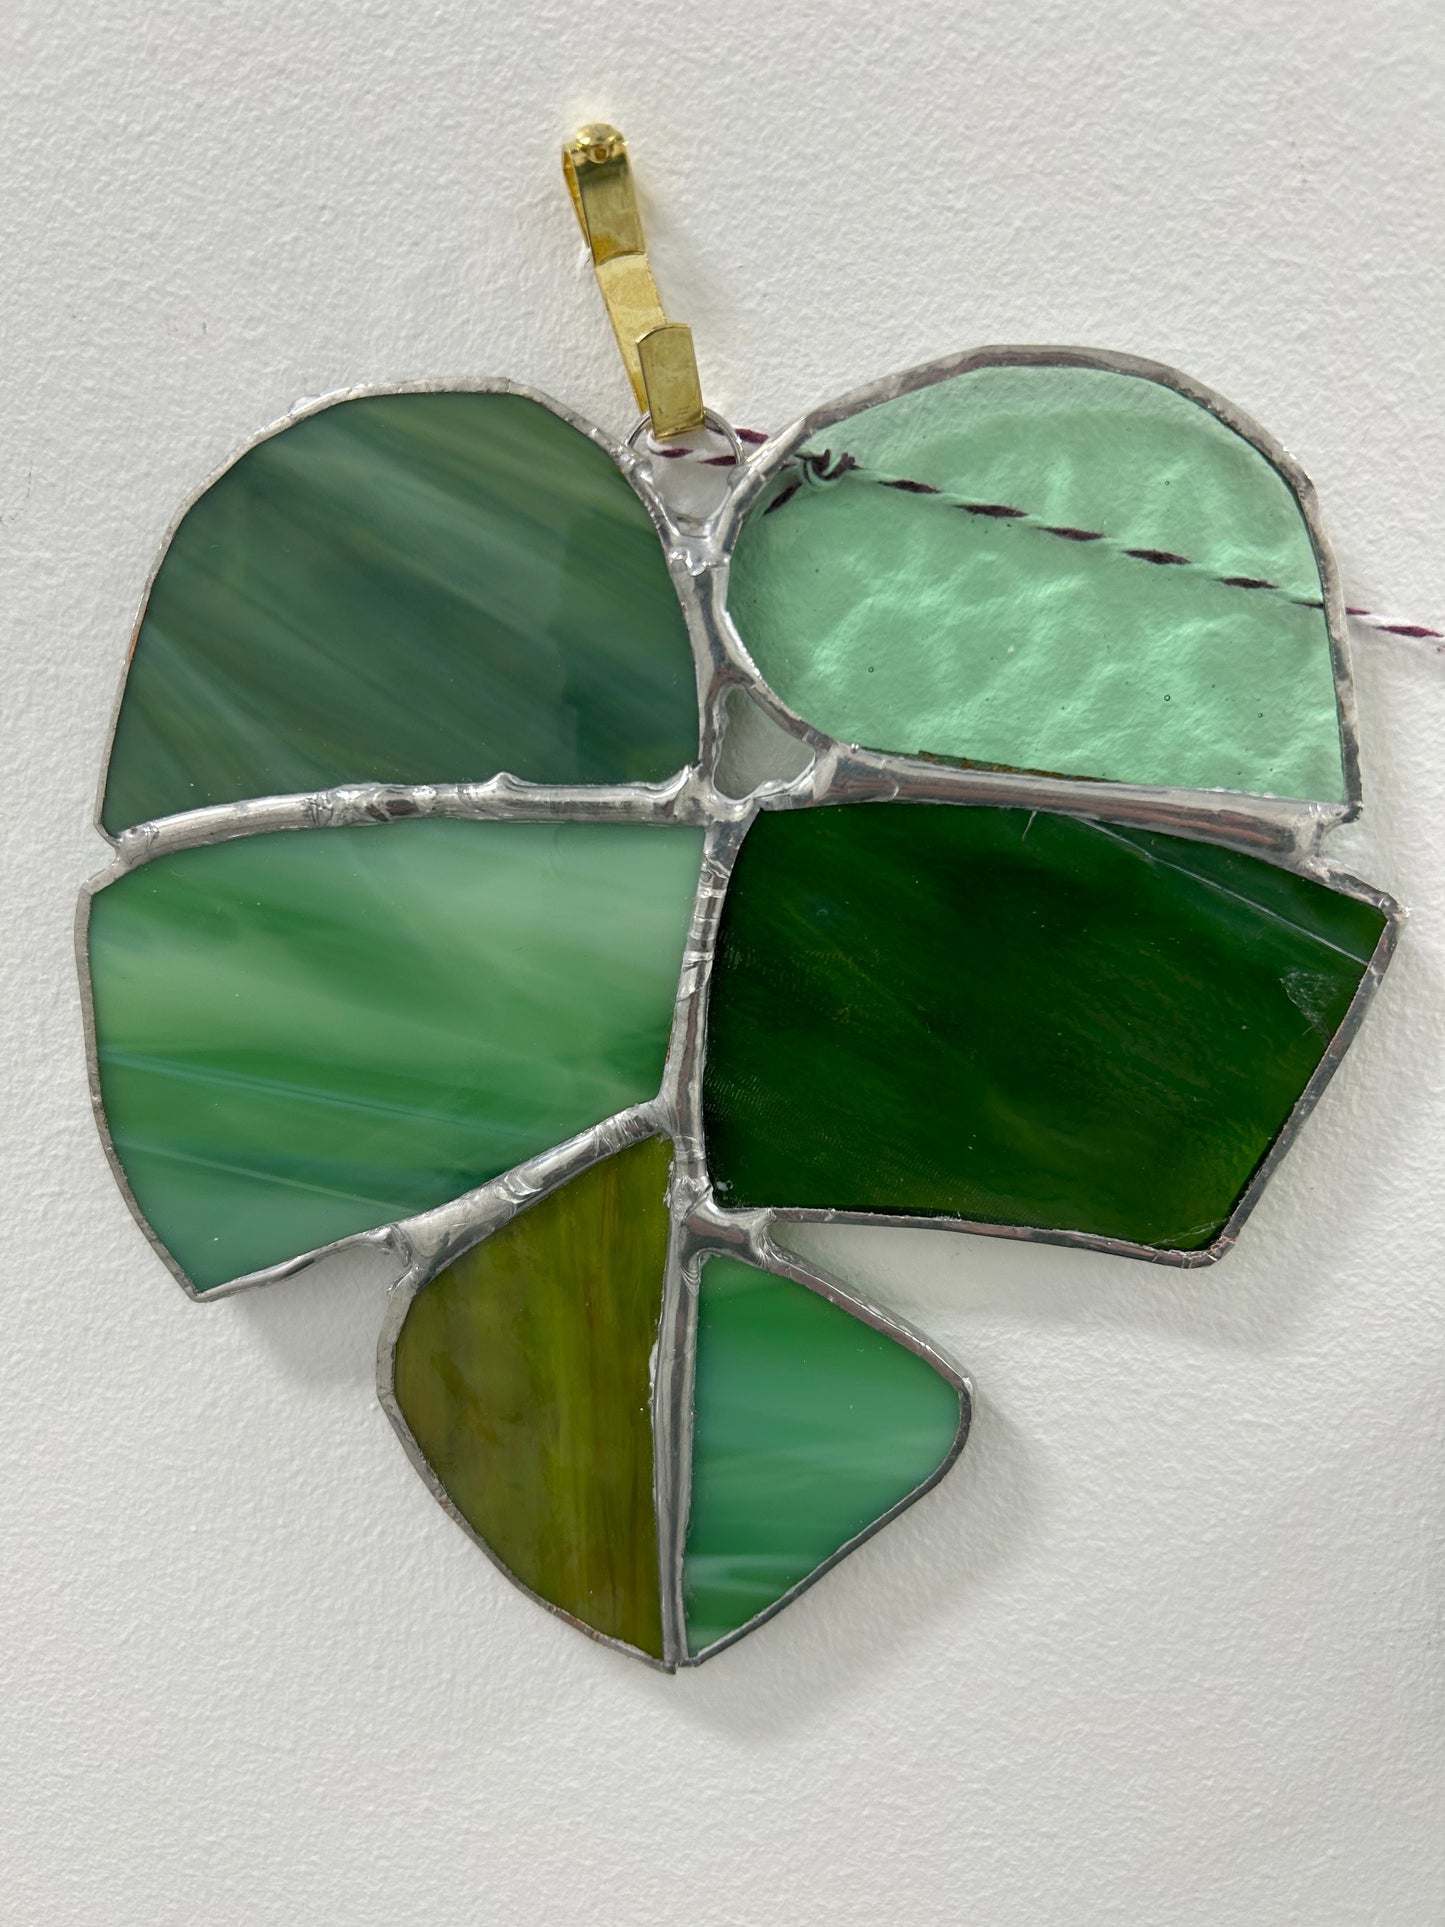 Beginner Stained Glass class, May 9,4-6:00 pm